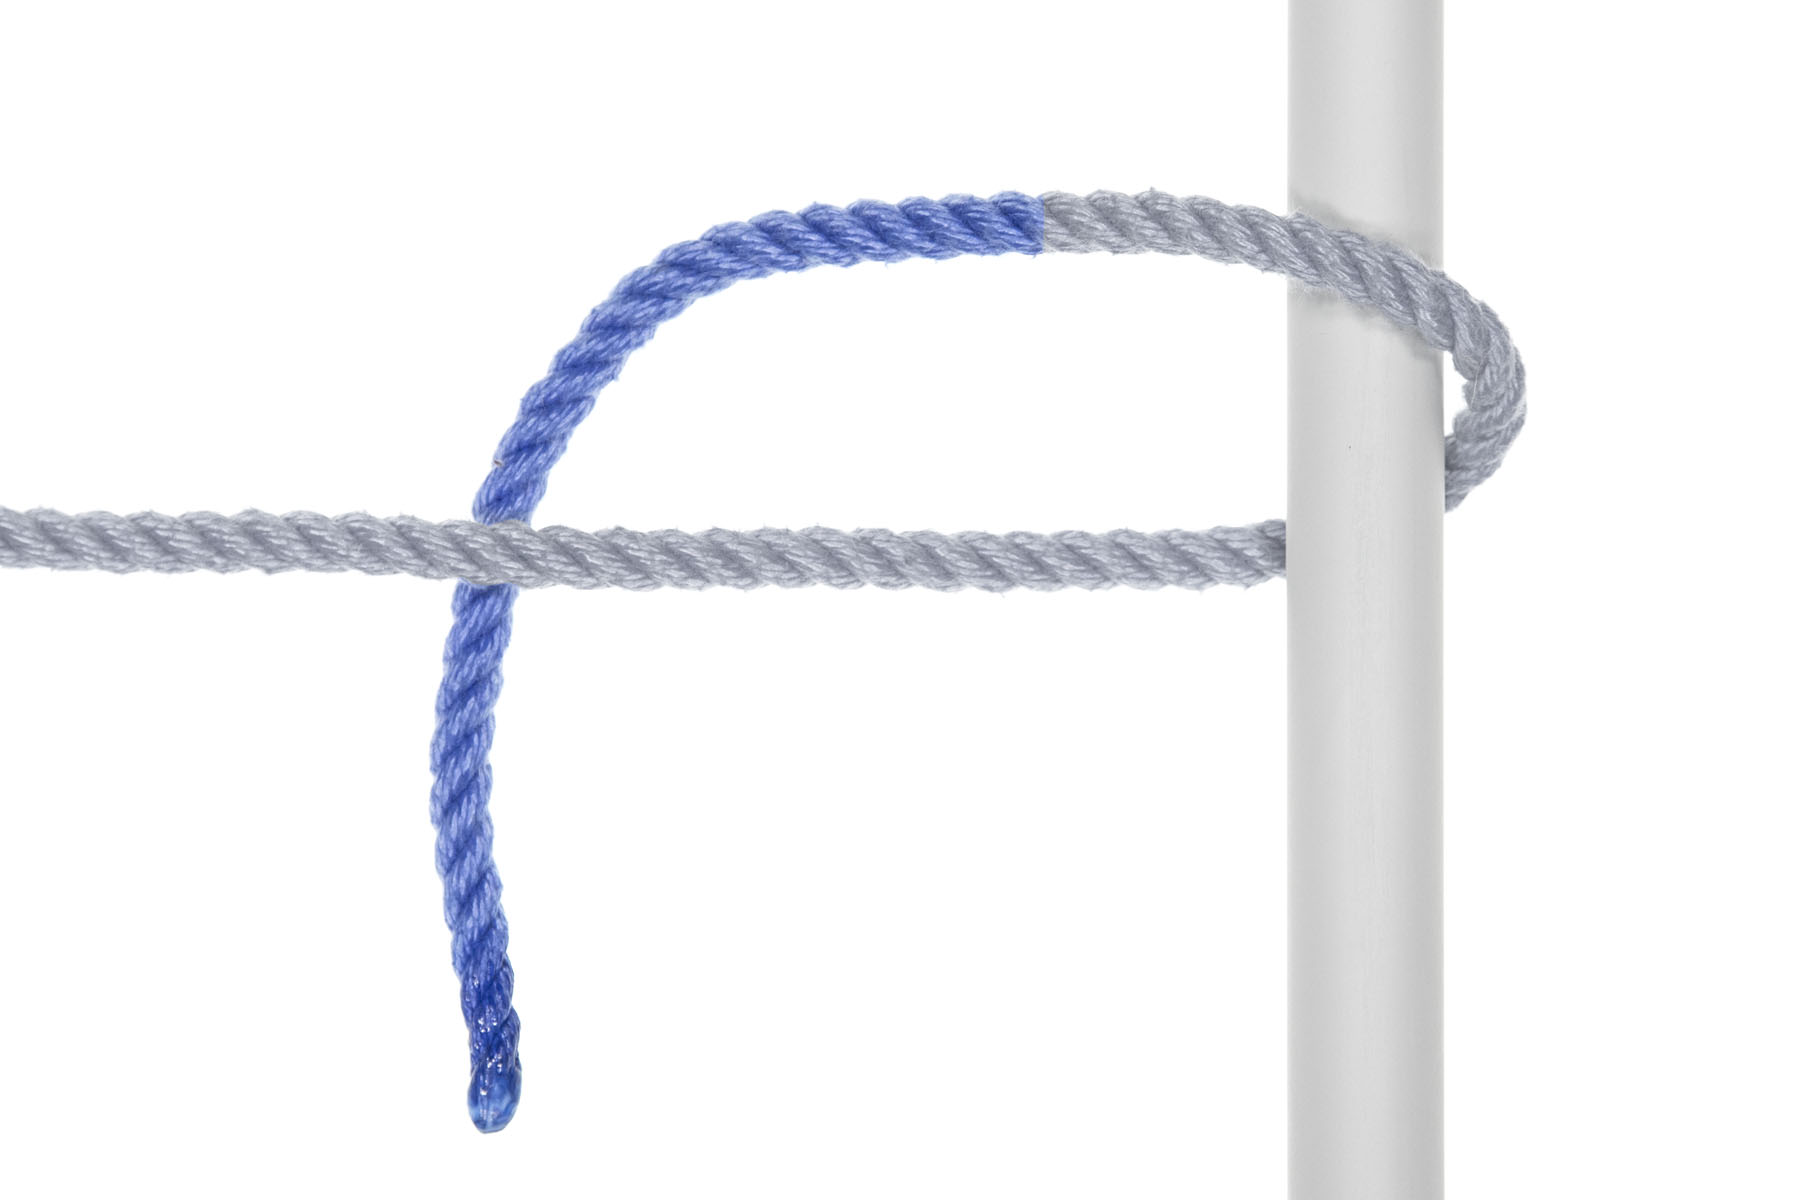 The blue rope crosses under the standing part.